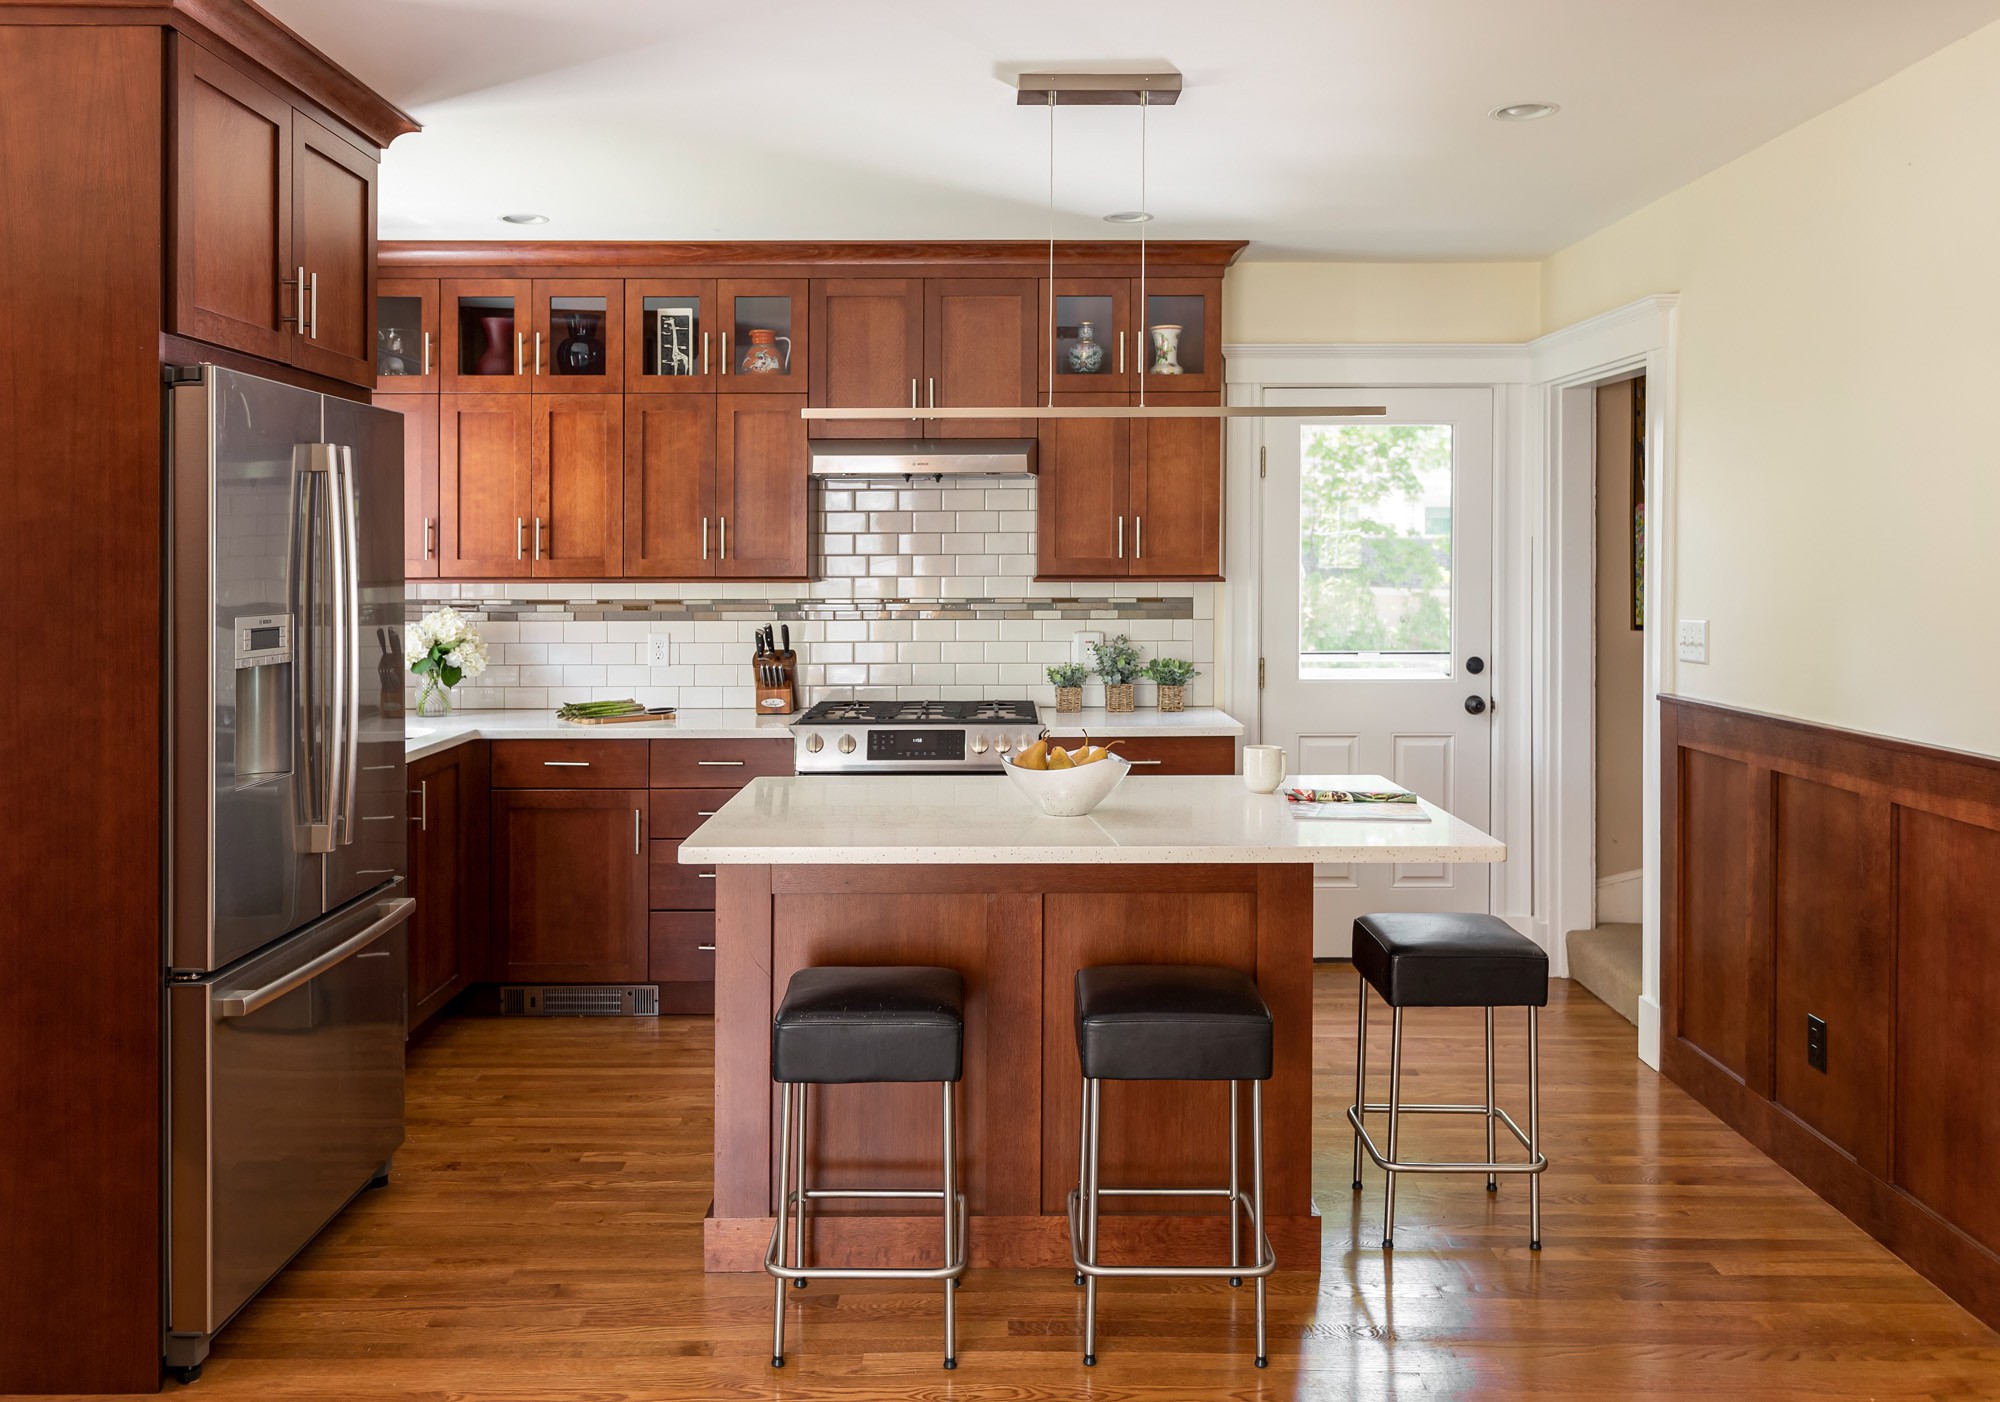 Updating the oak stain adds a modern feel (from Houzz)